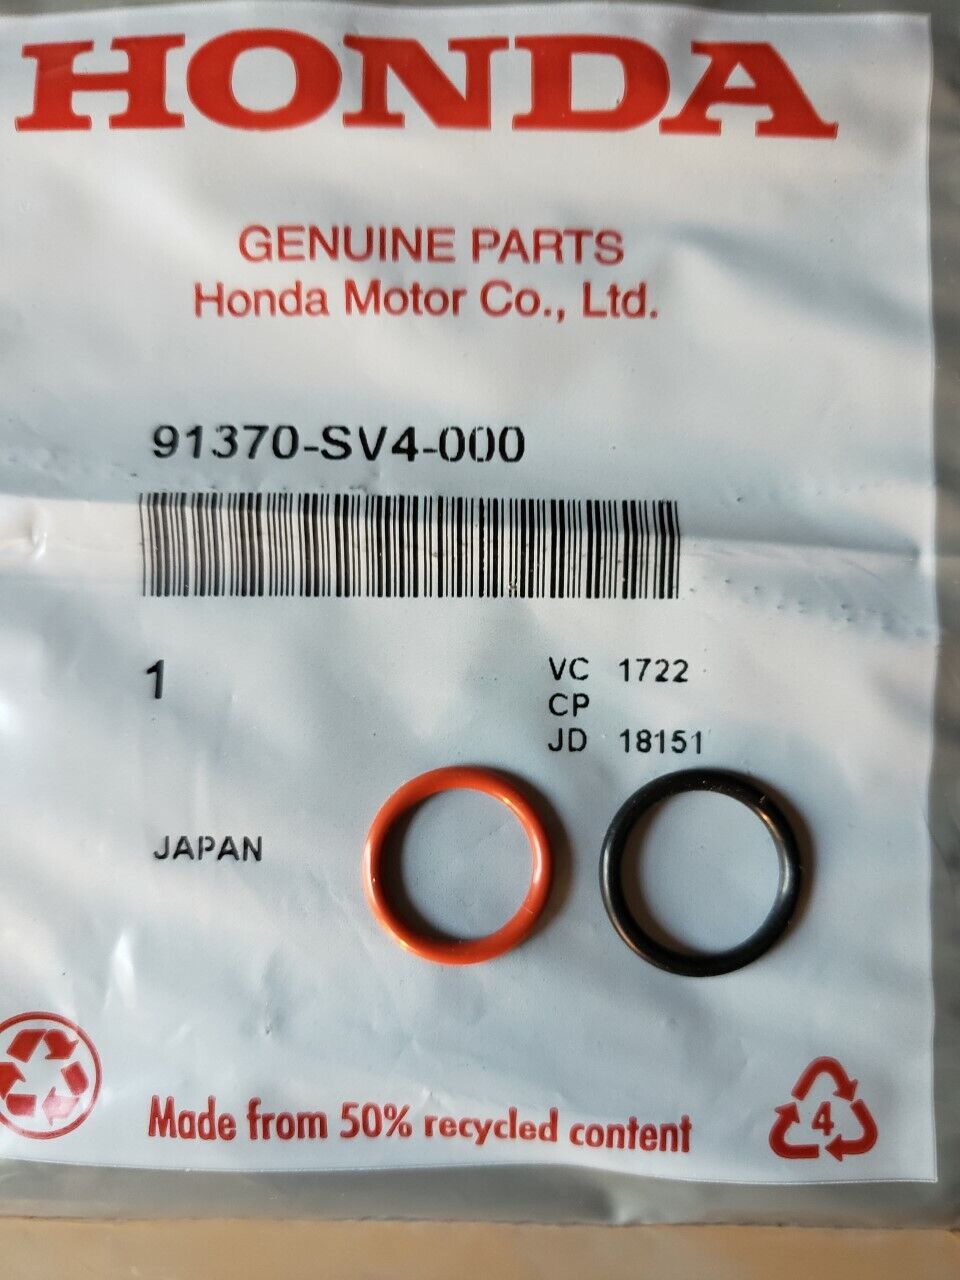 OEM ACURA HONDA Power Steering Pump Rubber Inlet & Outlet O-Ring Seals 2 pcs KIT